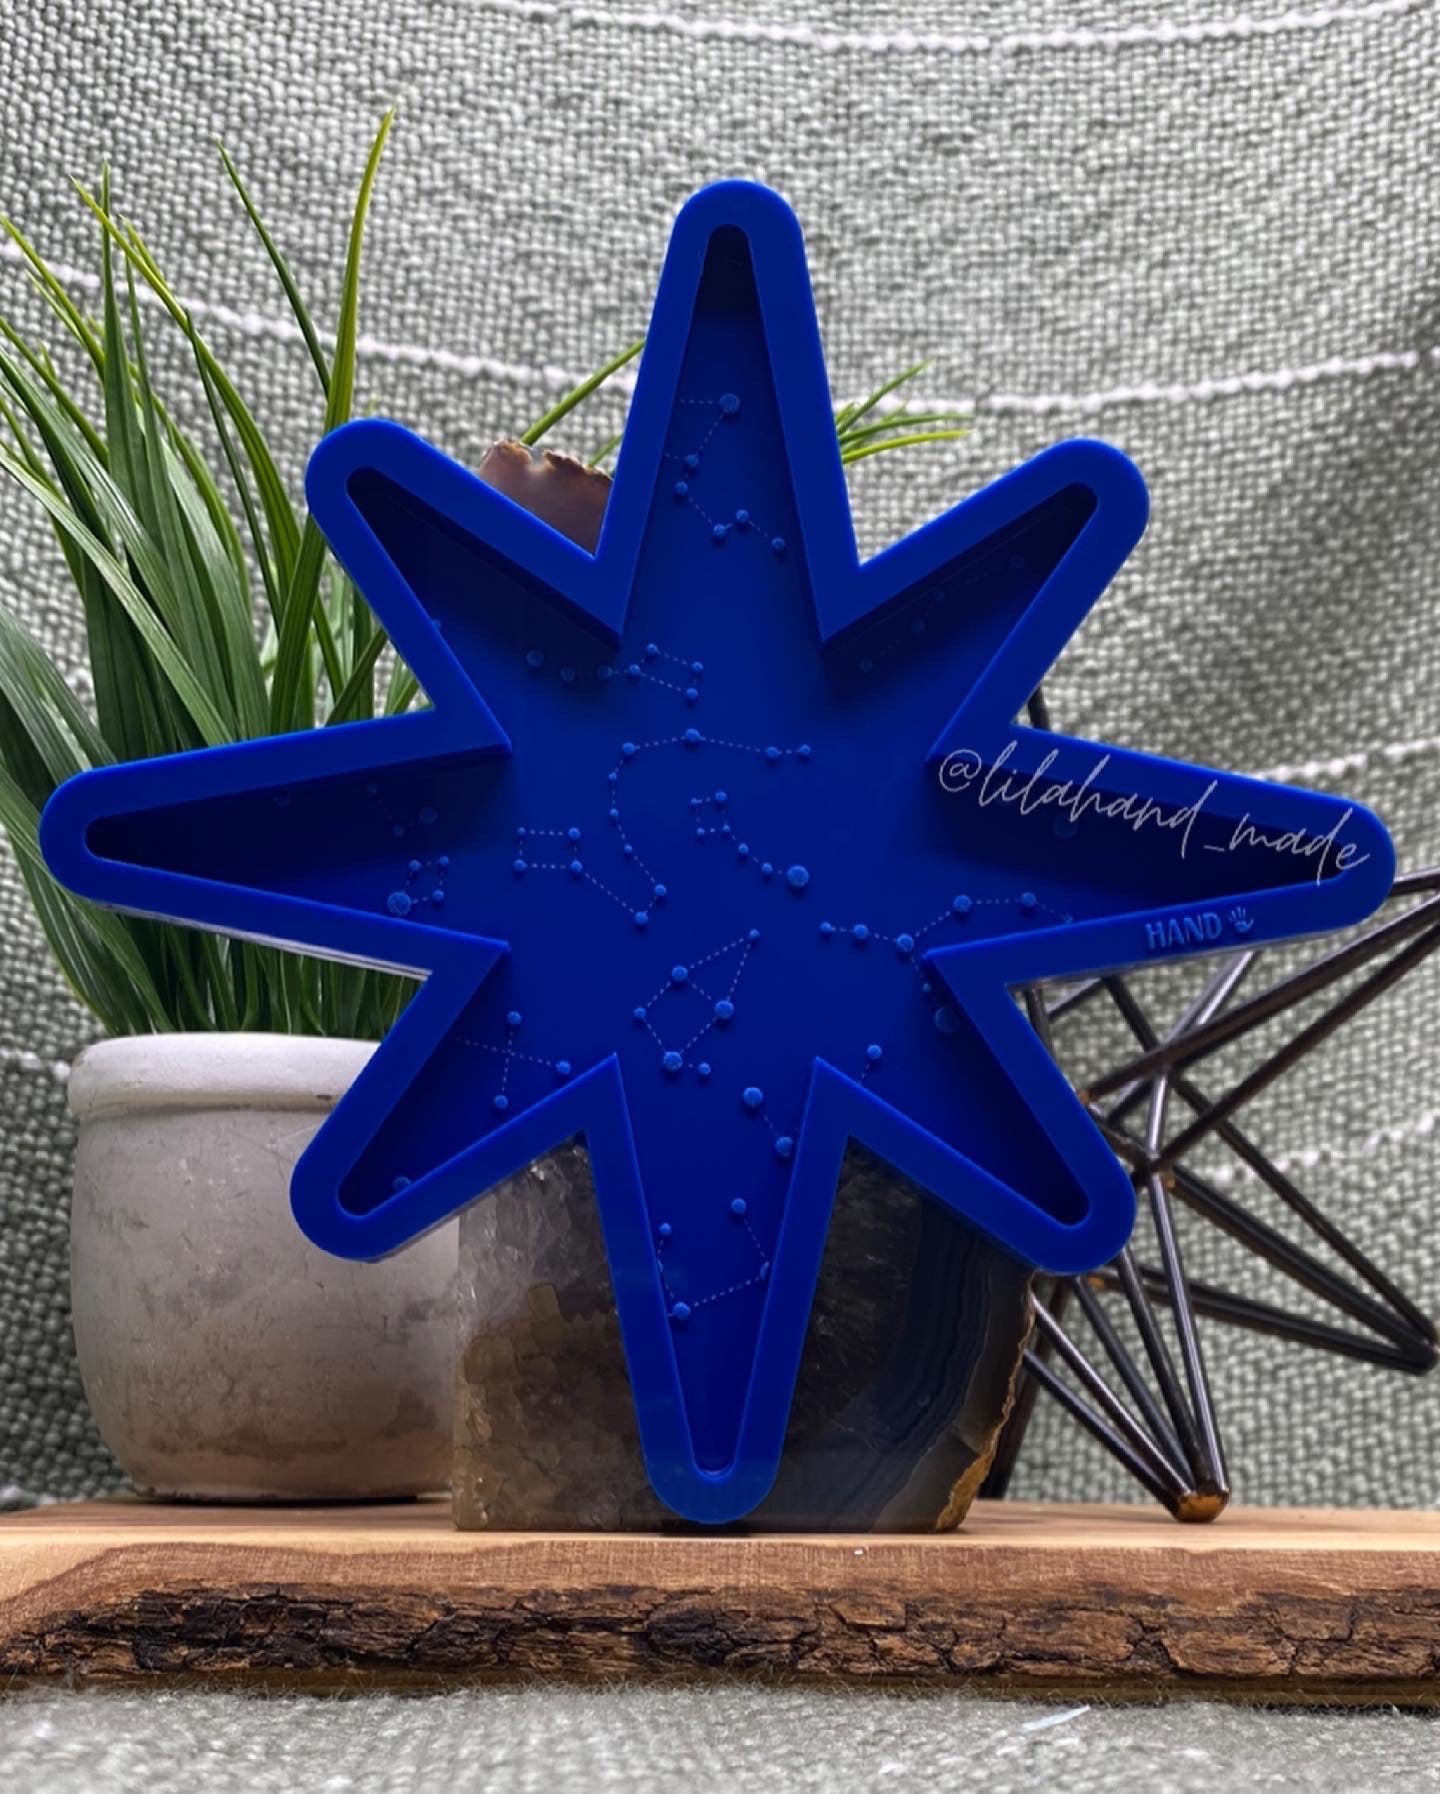 8-pointed star constellation flat mold